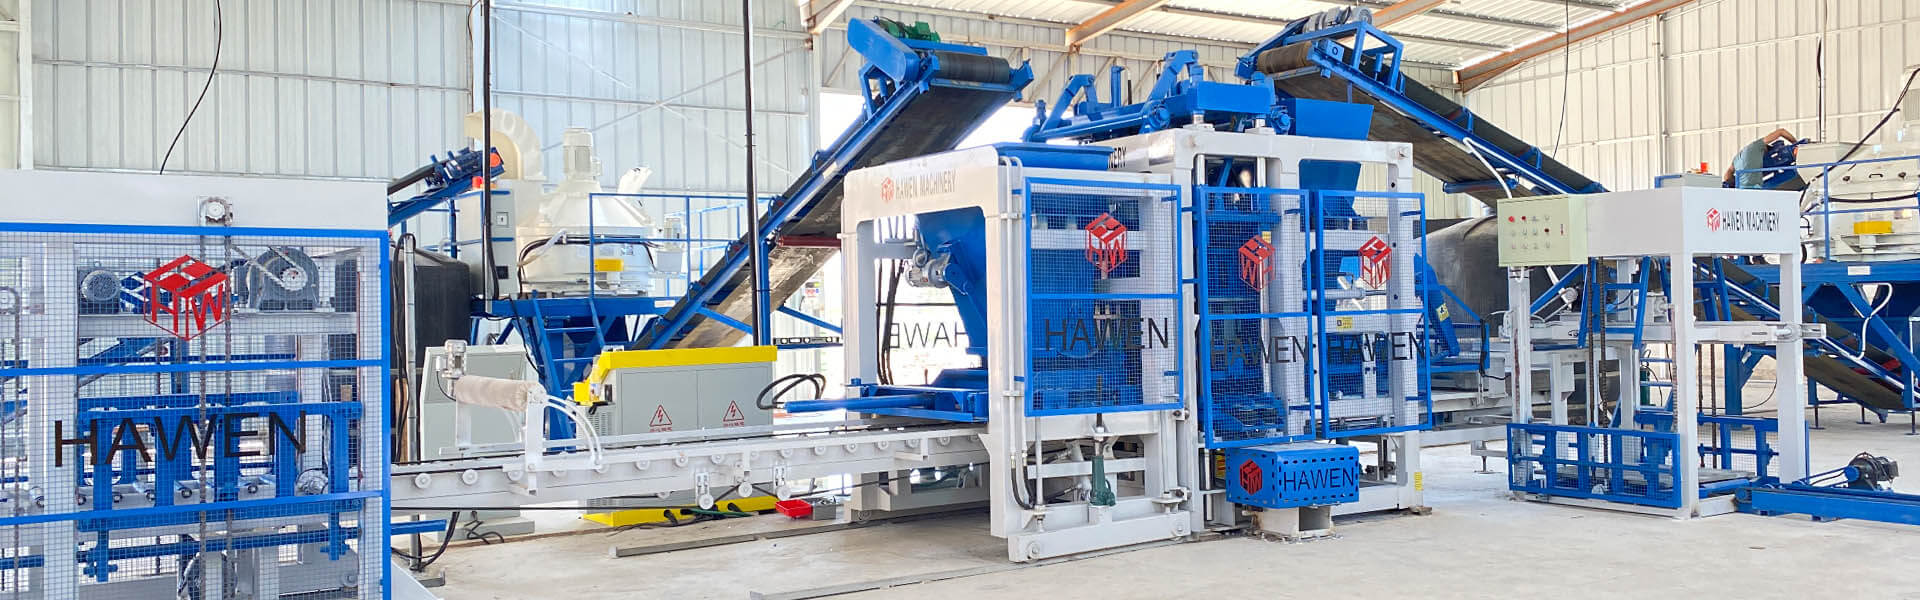 Automatic Offline Palletizing System Cases